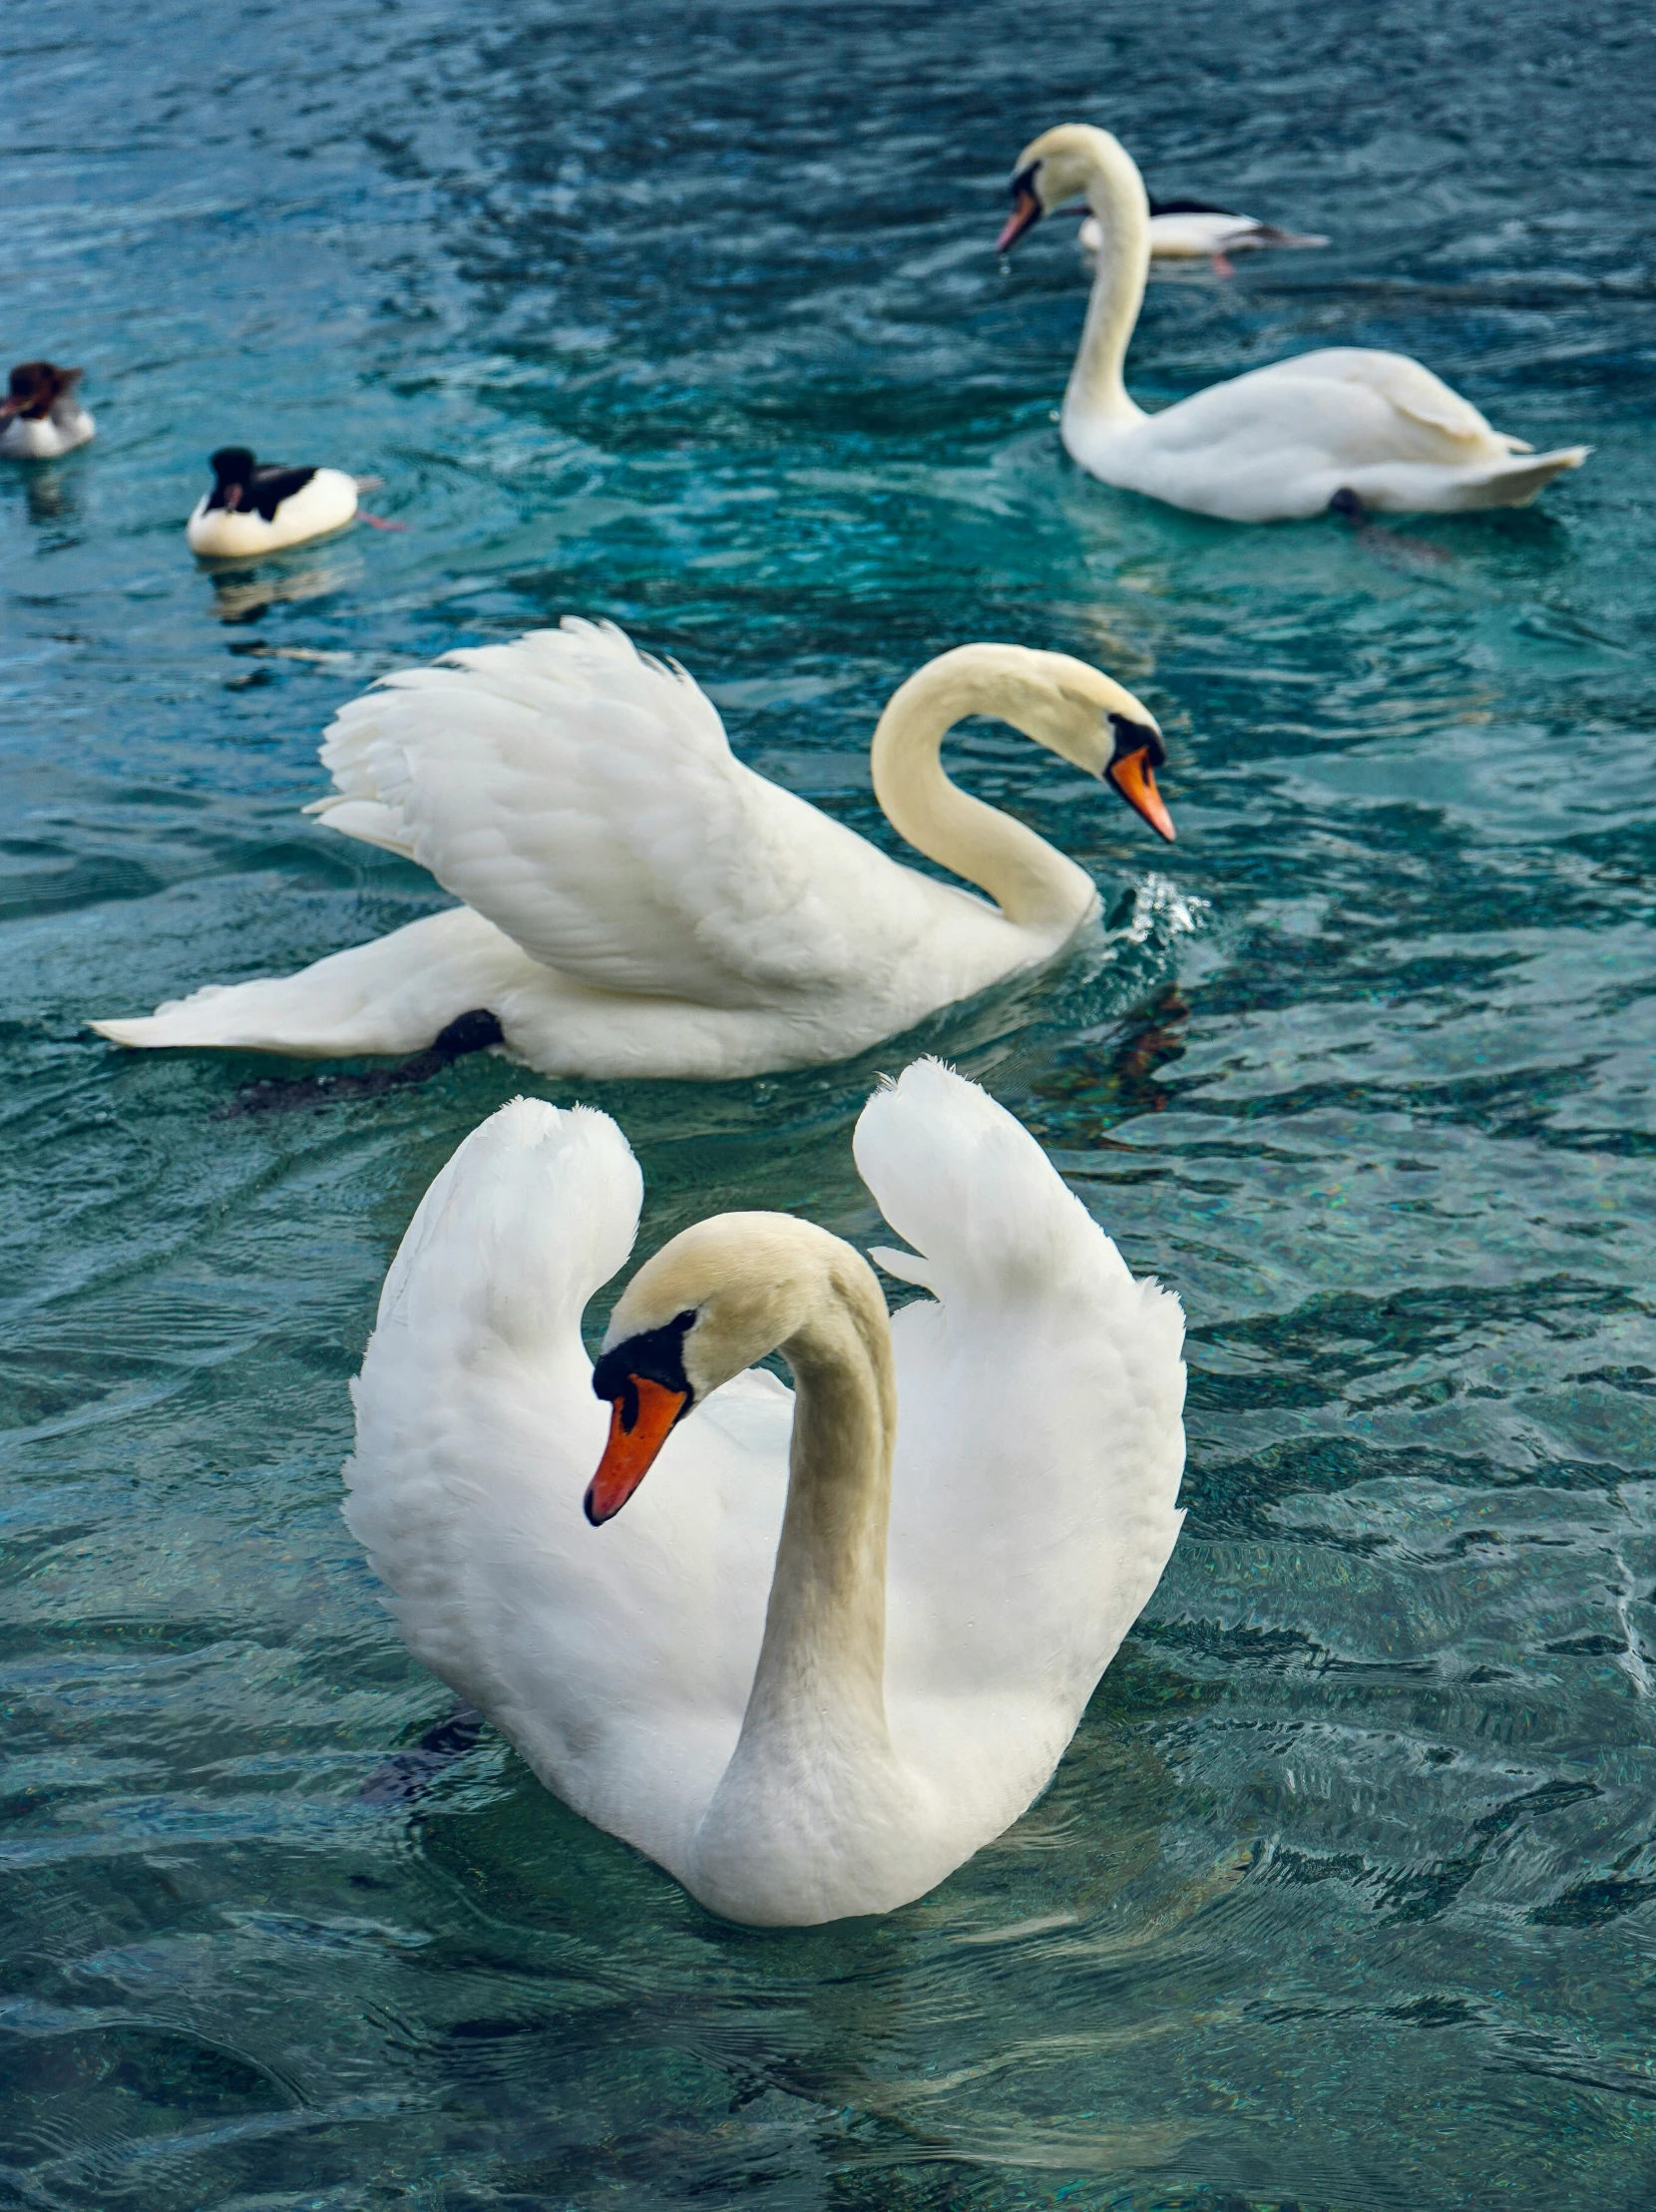 some white swans swimming together in a body of water